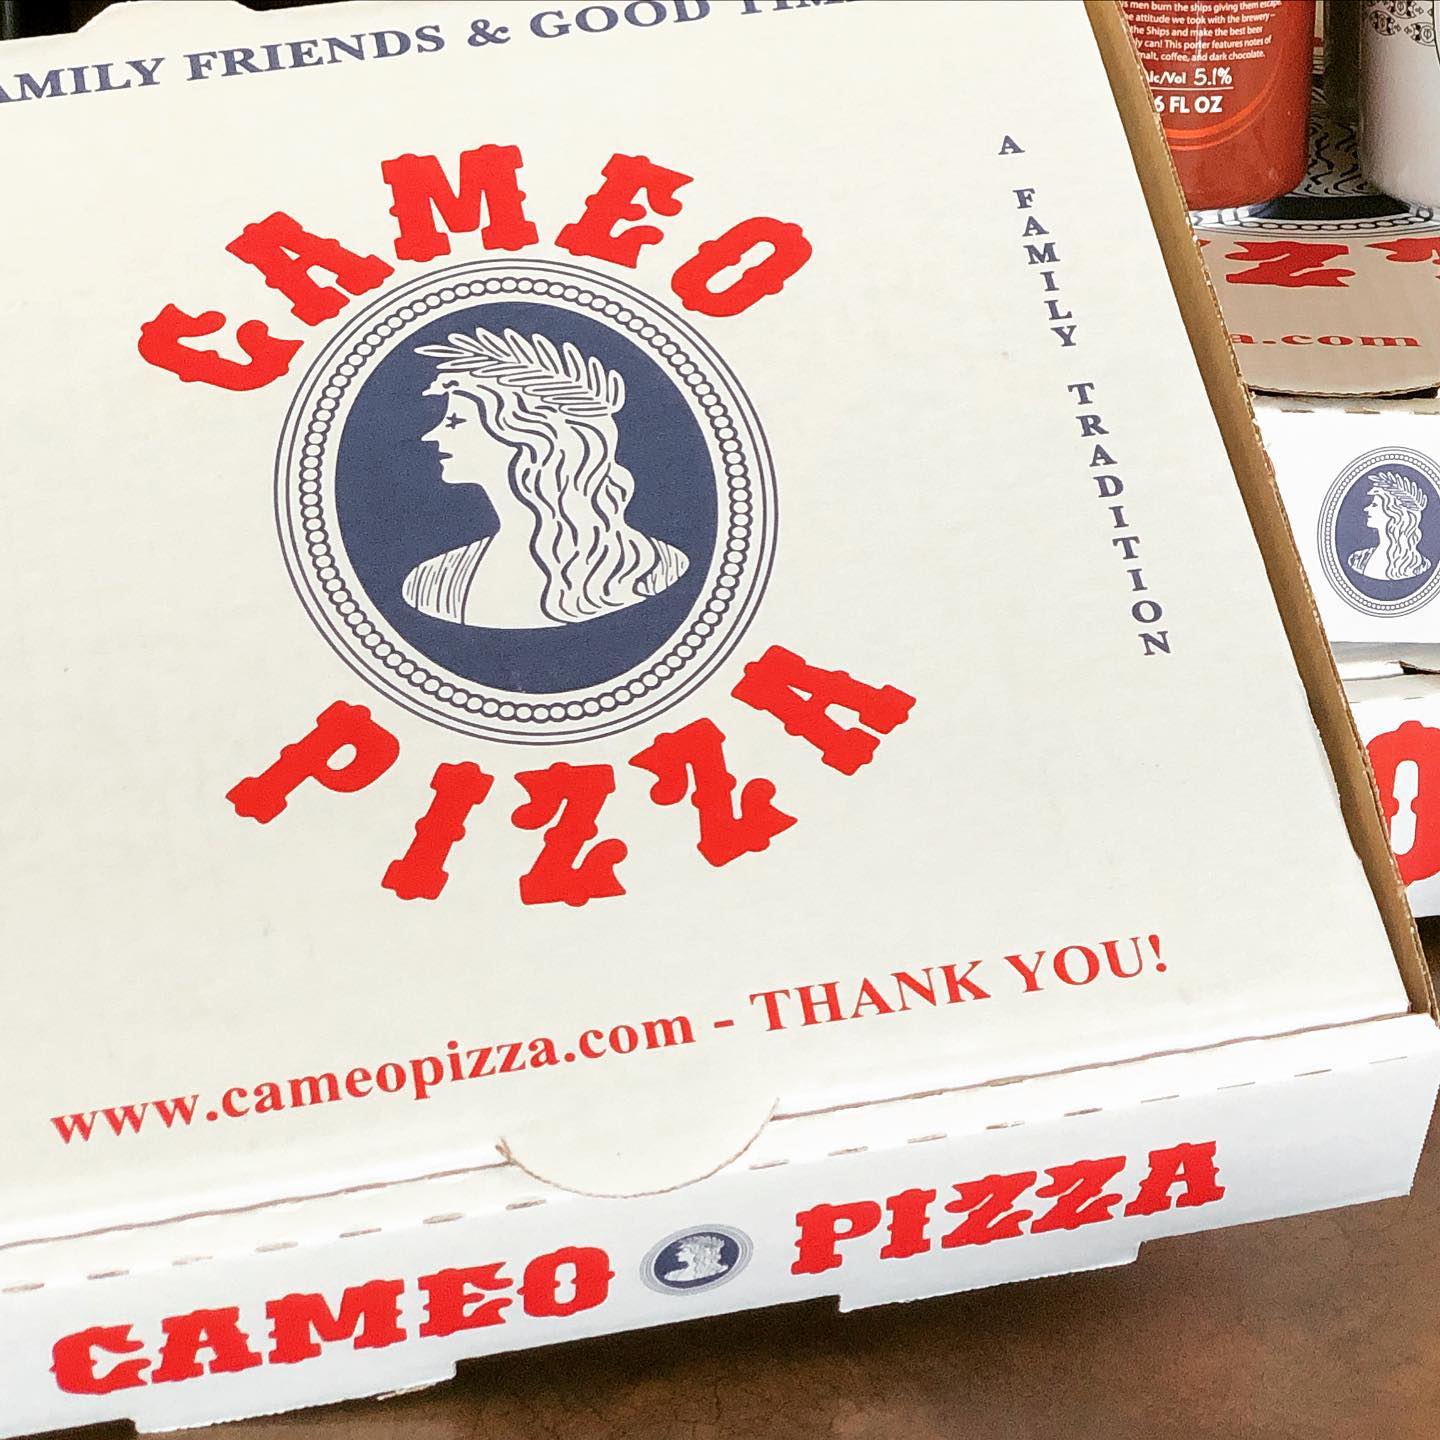 About – Cameo Pizza